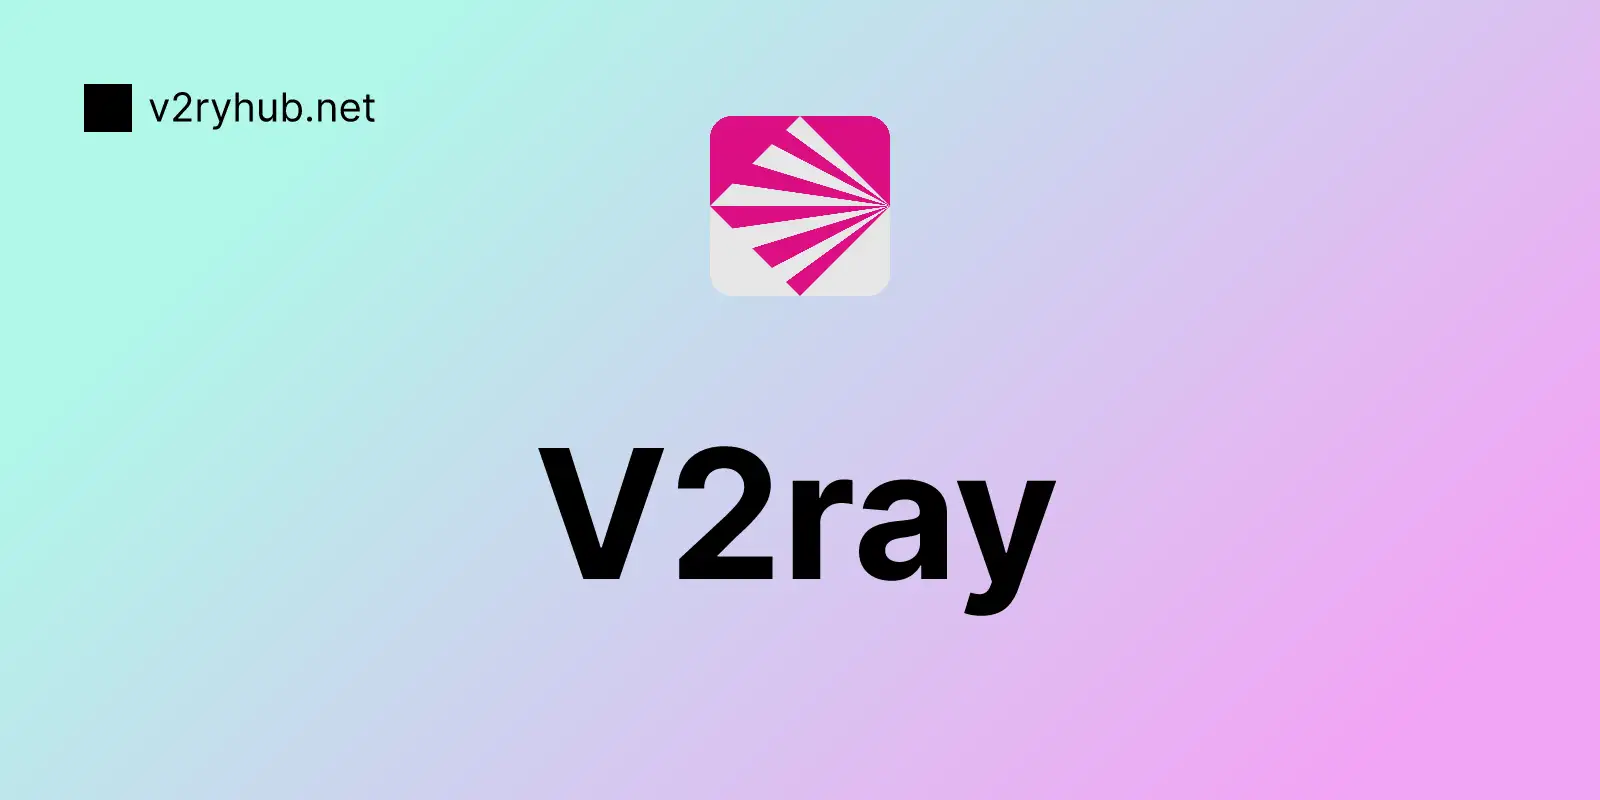 Getting started with V2ray Proxy for beginner